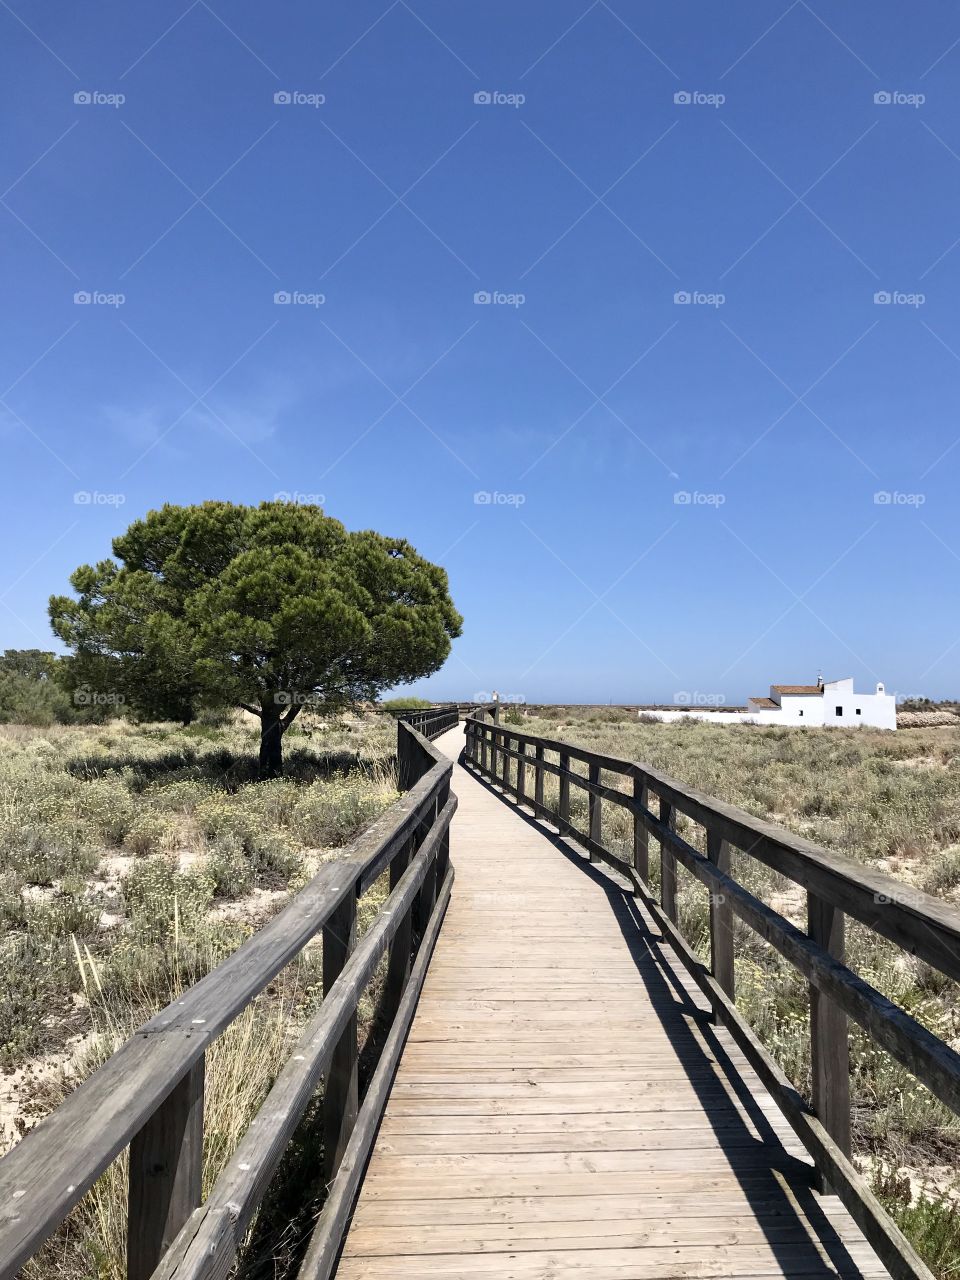 Pathway at Ria Formosa’s Natural Park. Since 1987, the Ria Formosa is one of the 7 Natural Wonders of Portugal not to be missed during your holidays in the Algarve.